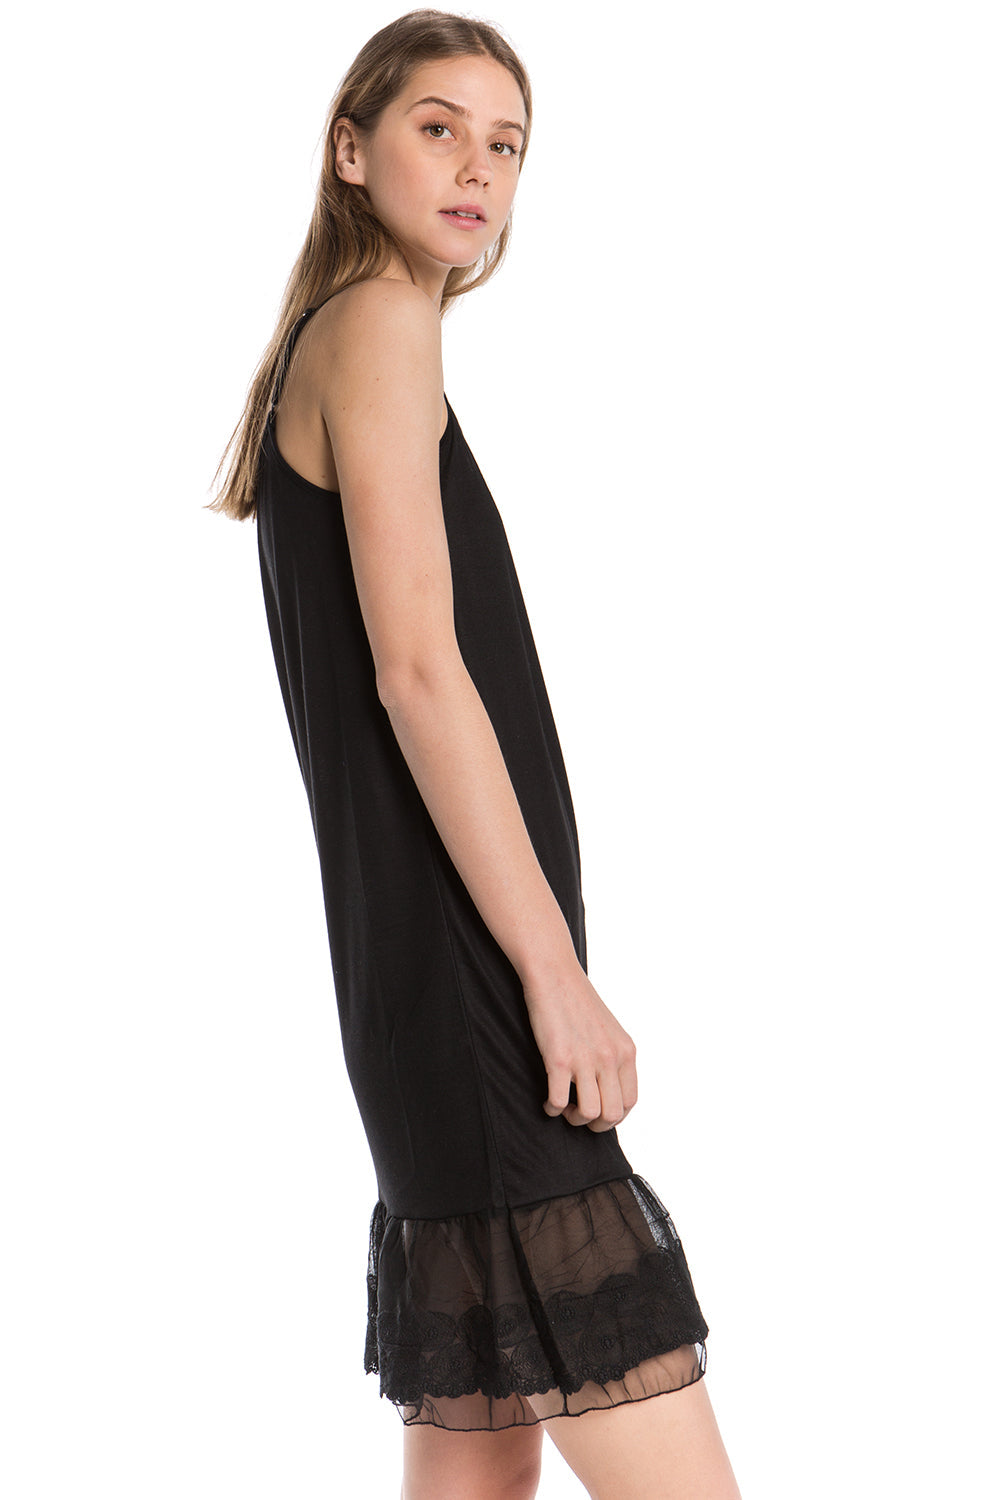 Women's Circle Lace Knit Full Slip with Adjustable Straps - Shop Lev